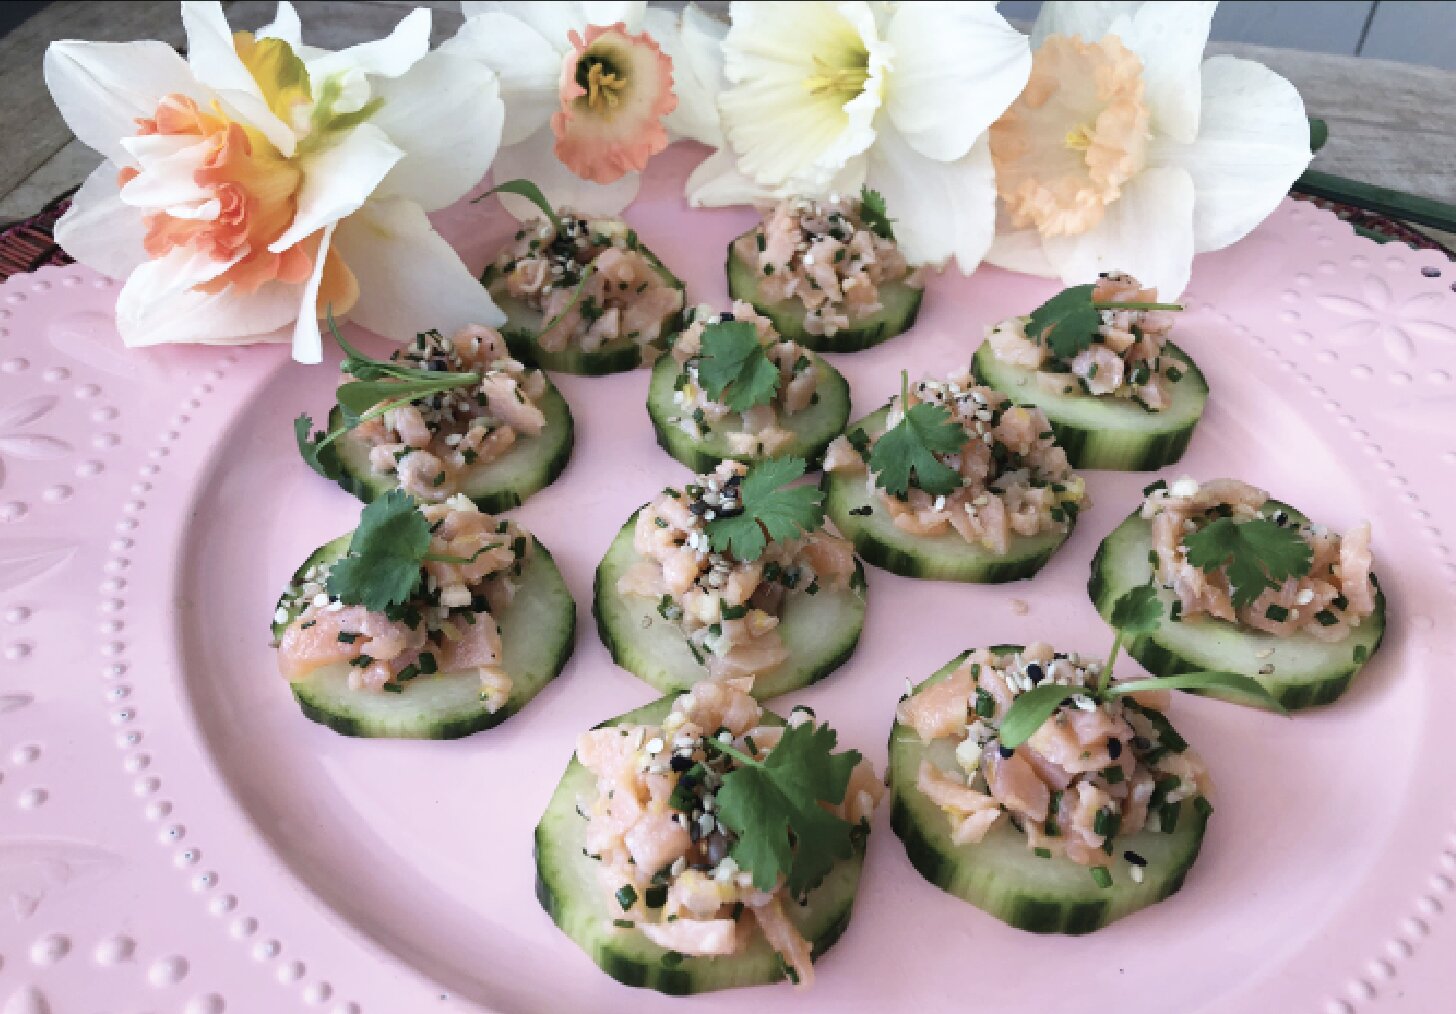 Smoked Salmon Tartare, served on cucumber rounds with sprigs of cilantro.